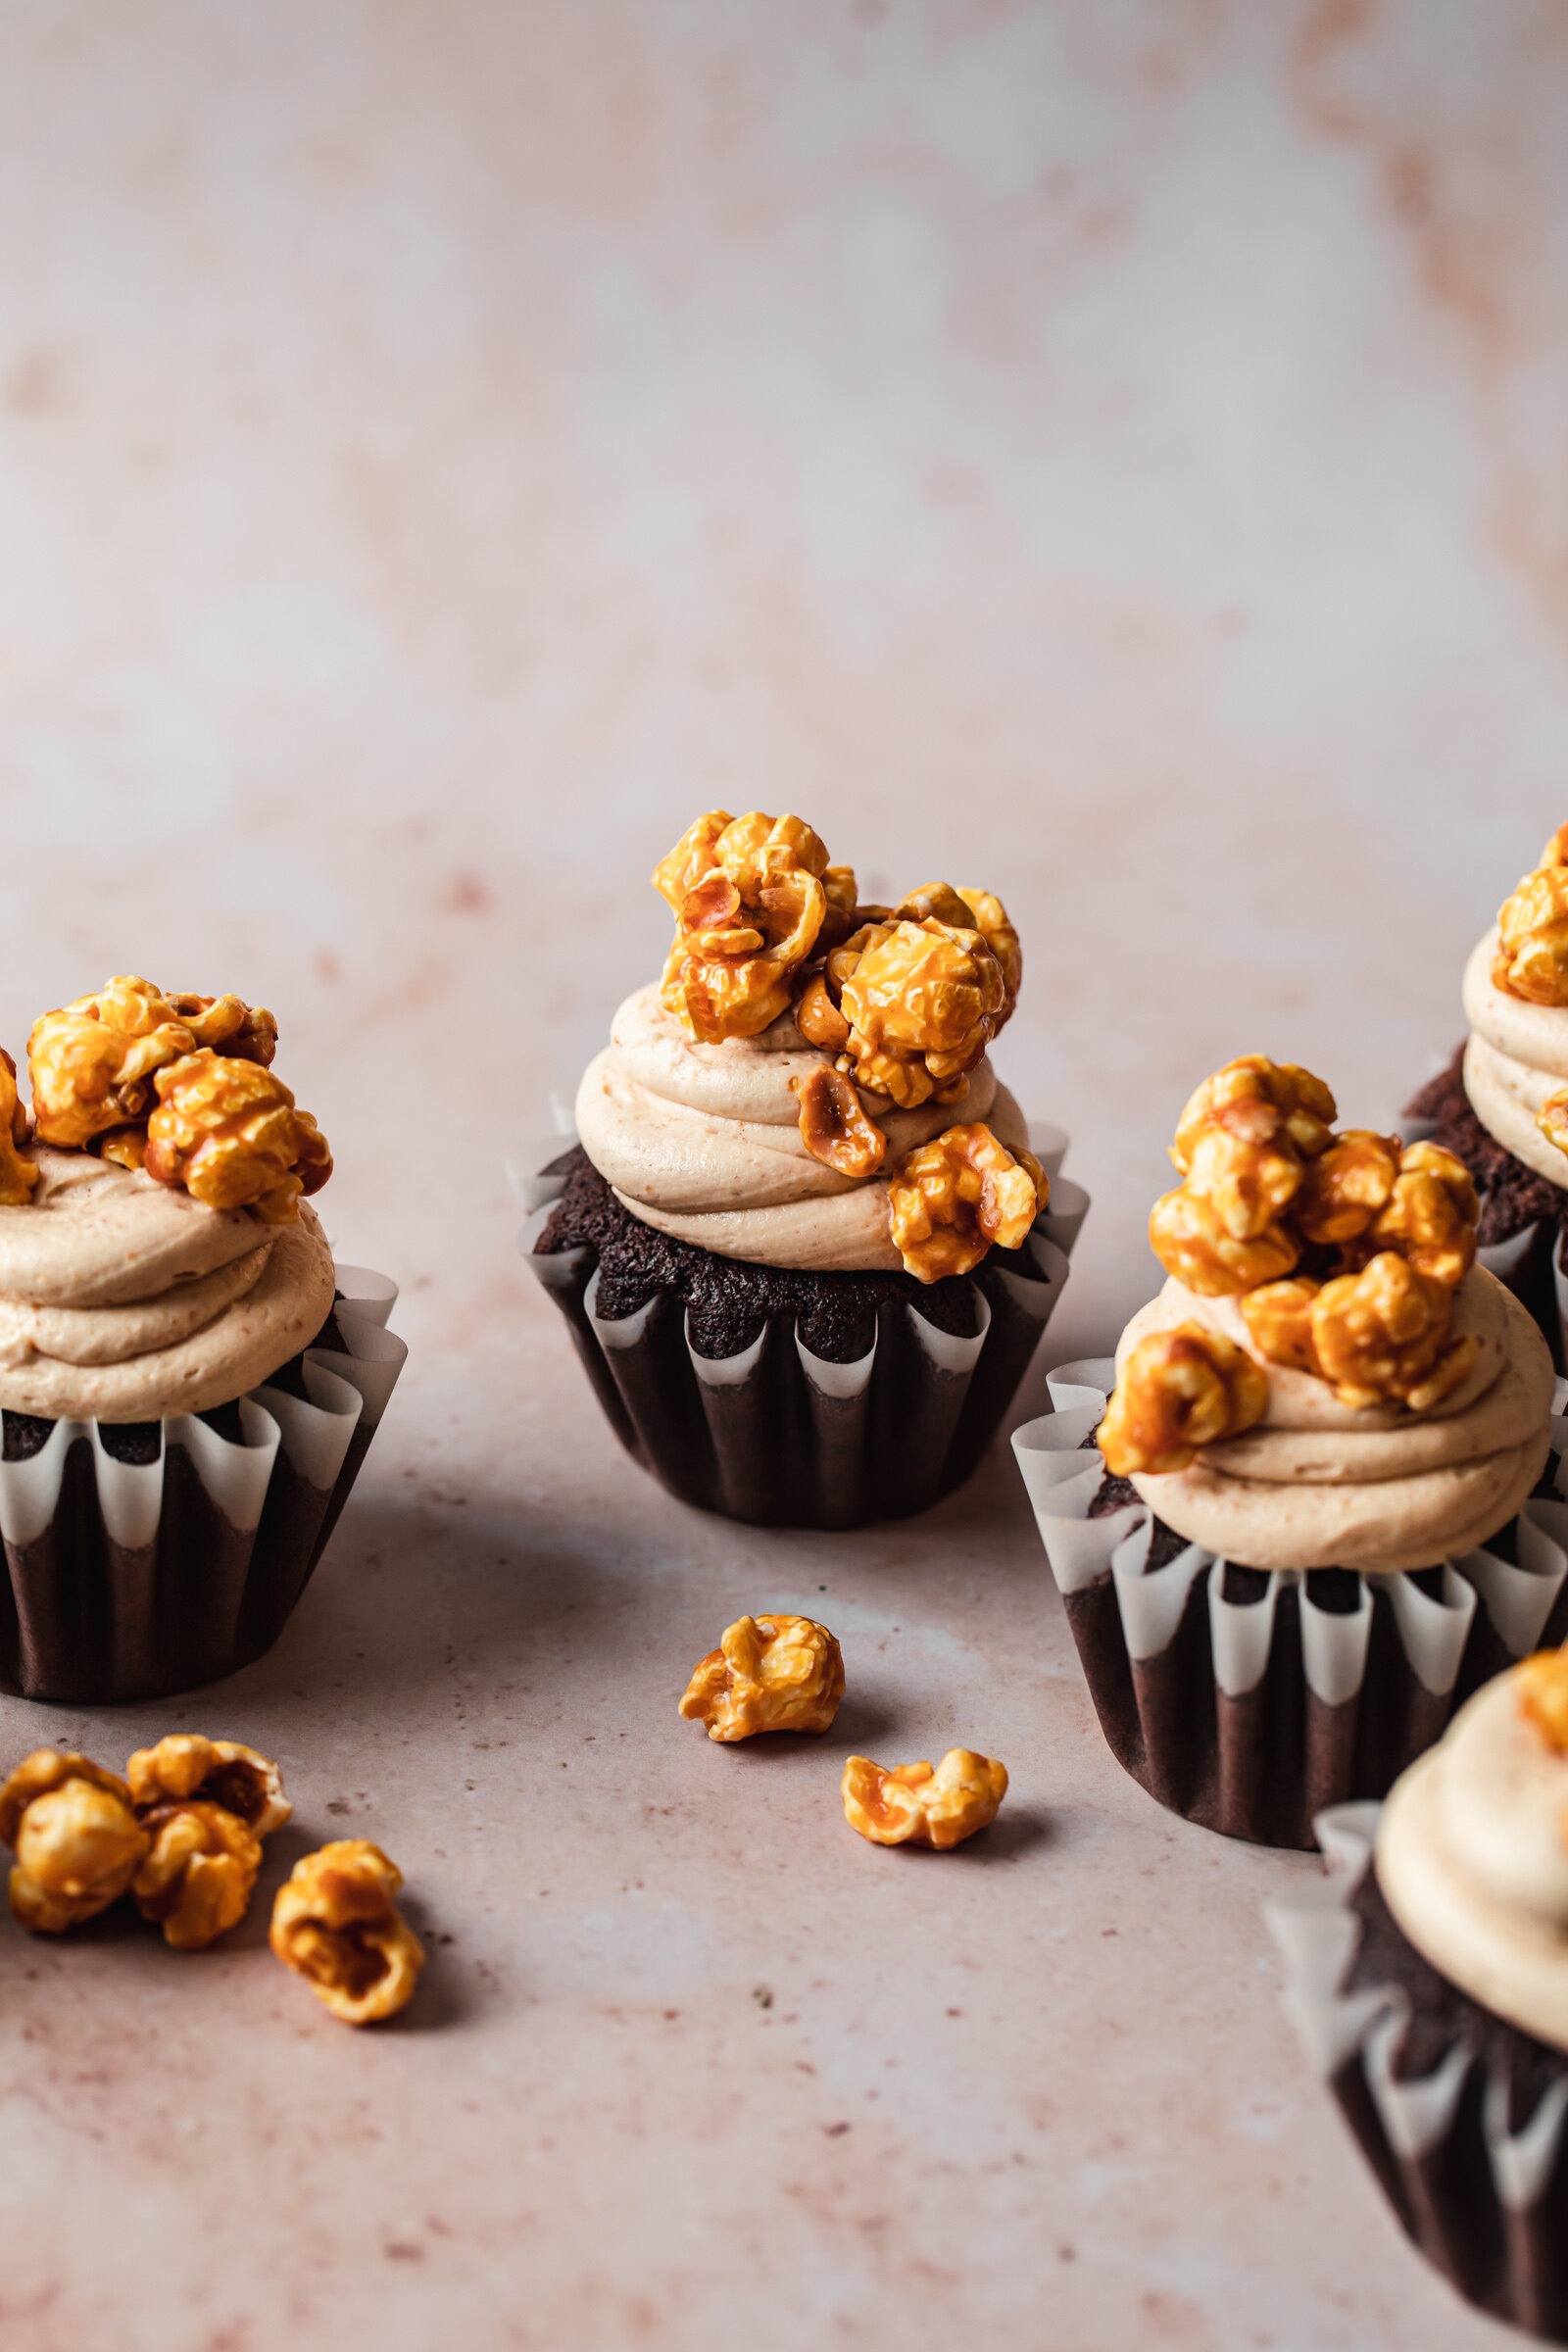 Chocolate cupcakes on a beige marble table with creamy peanut butter frosting and caramel popcorn on top.